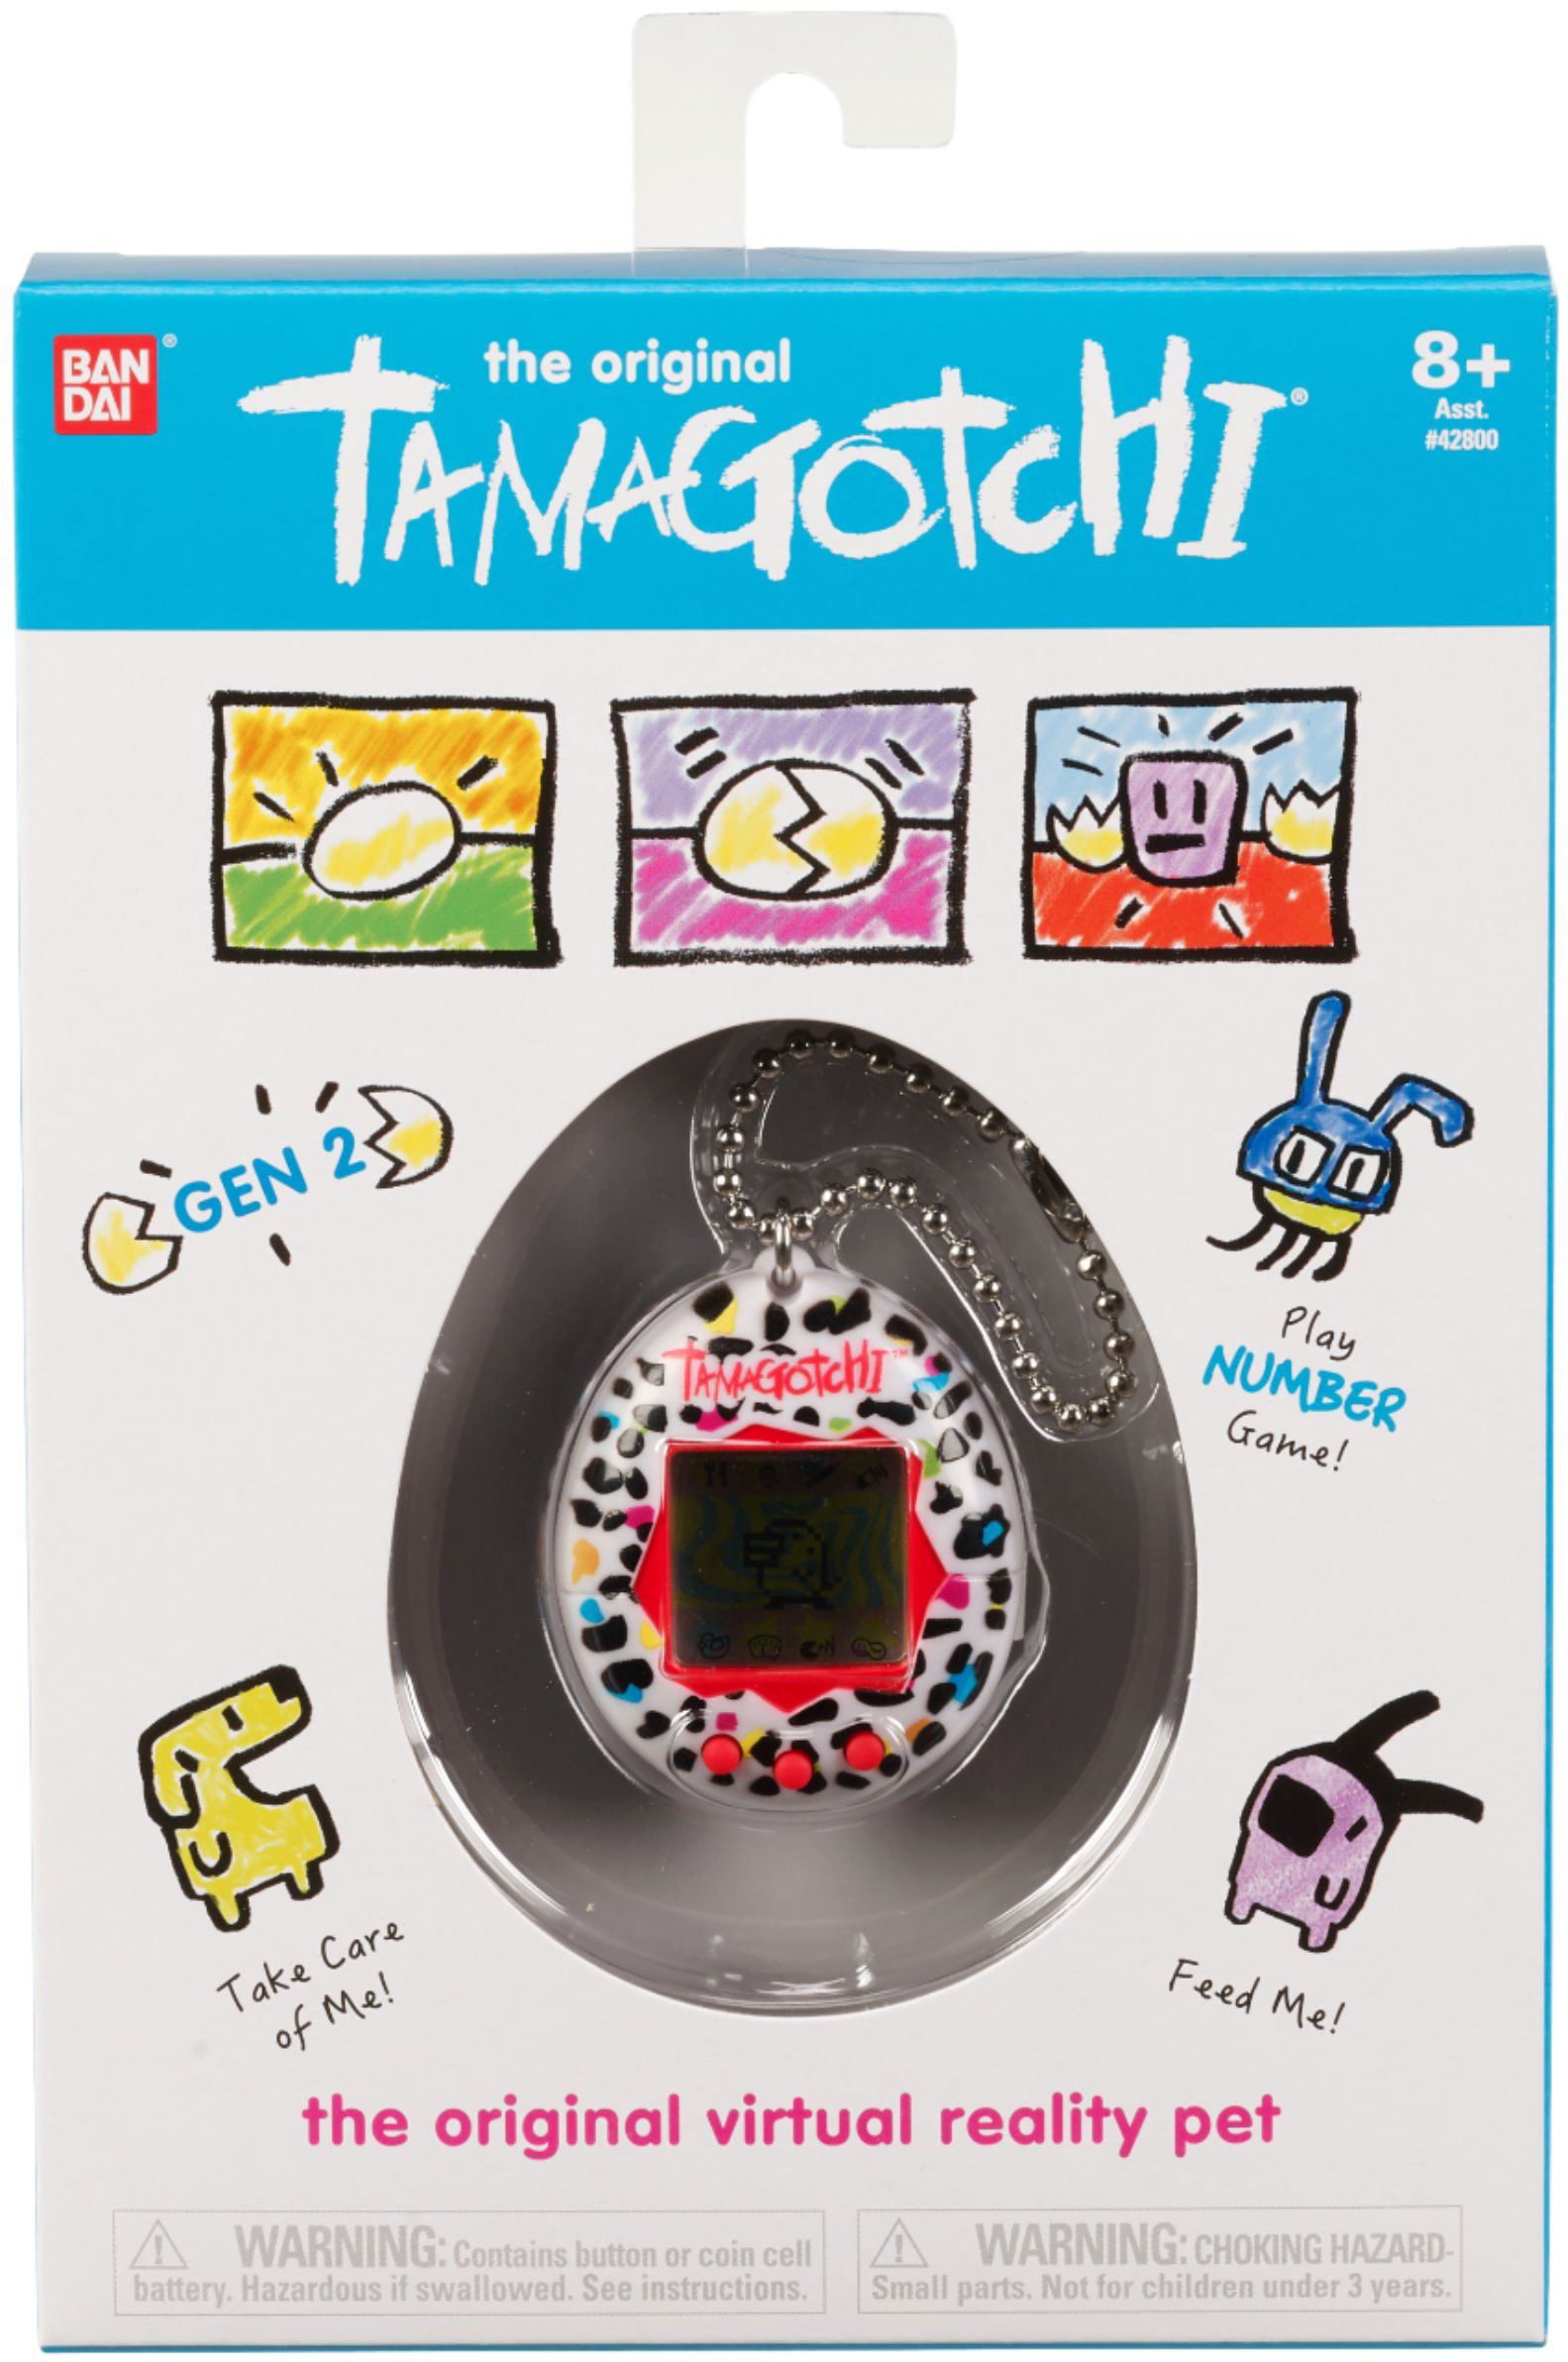 The Bandai Tamagotchi MIX: 20 Years Later, Popular Game Goes Back to Its  Origins